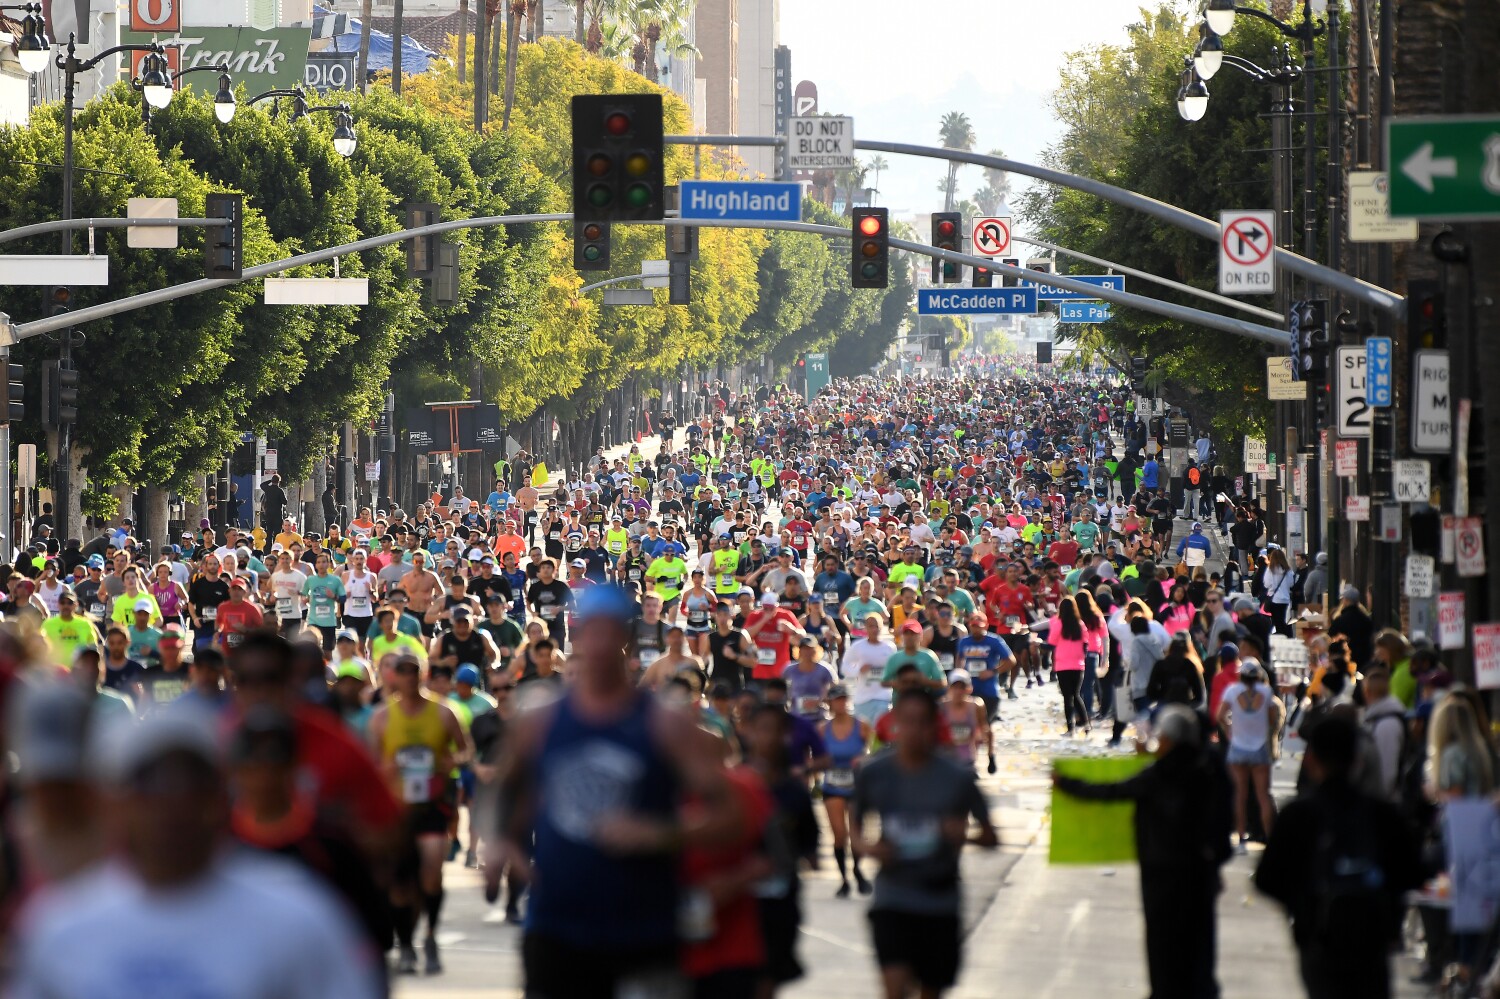 L.A. Marathon: Everything you need to know about this years race